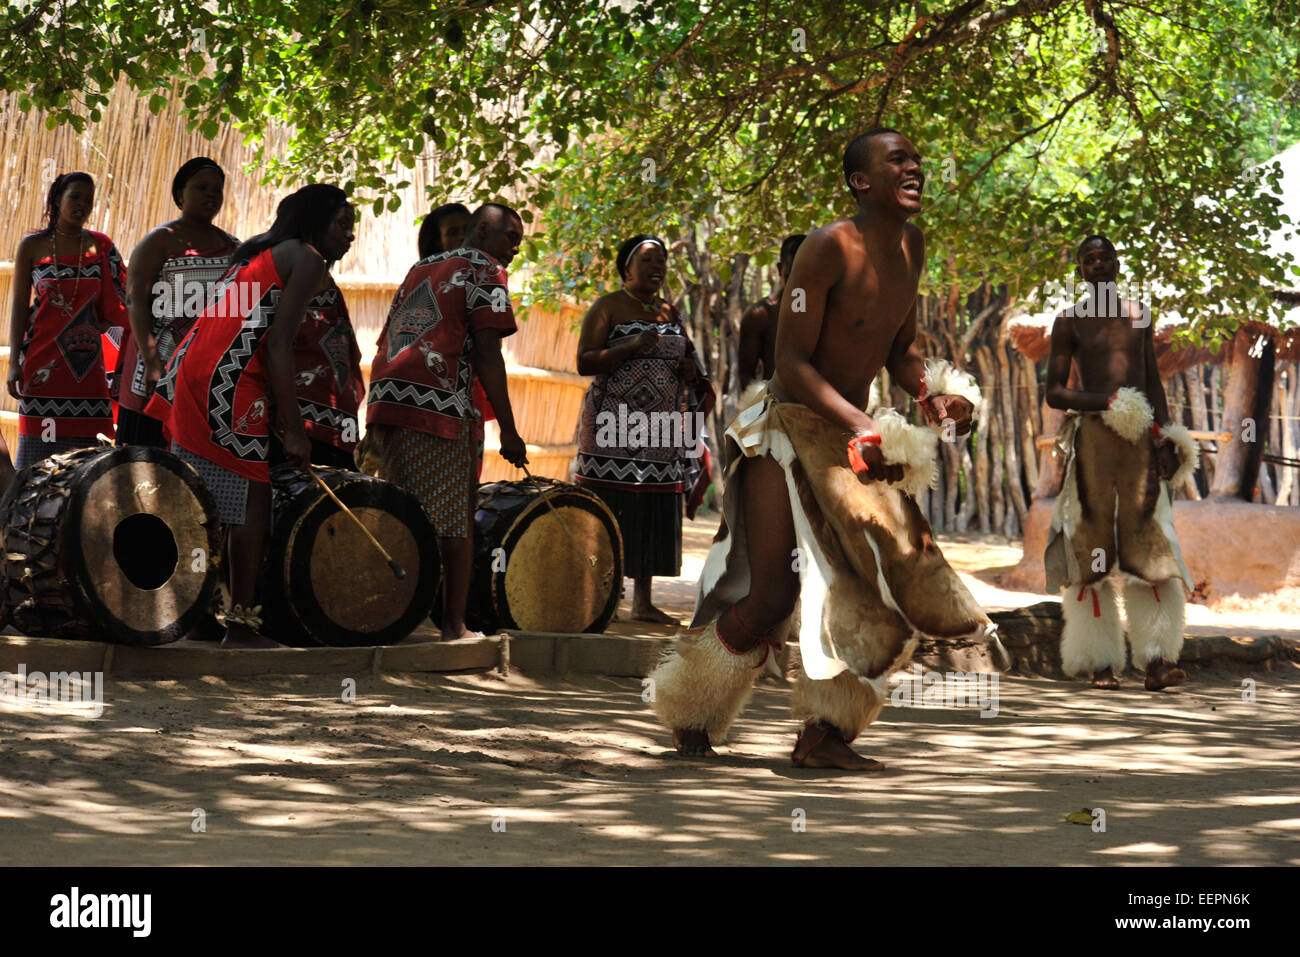 Adult male Swazi dancer in warrior dress performing traditional war dance with musicians and singers entertaining tourists, Matsamo, Swaziland Stock Photo